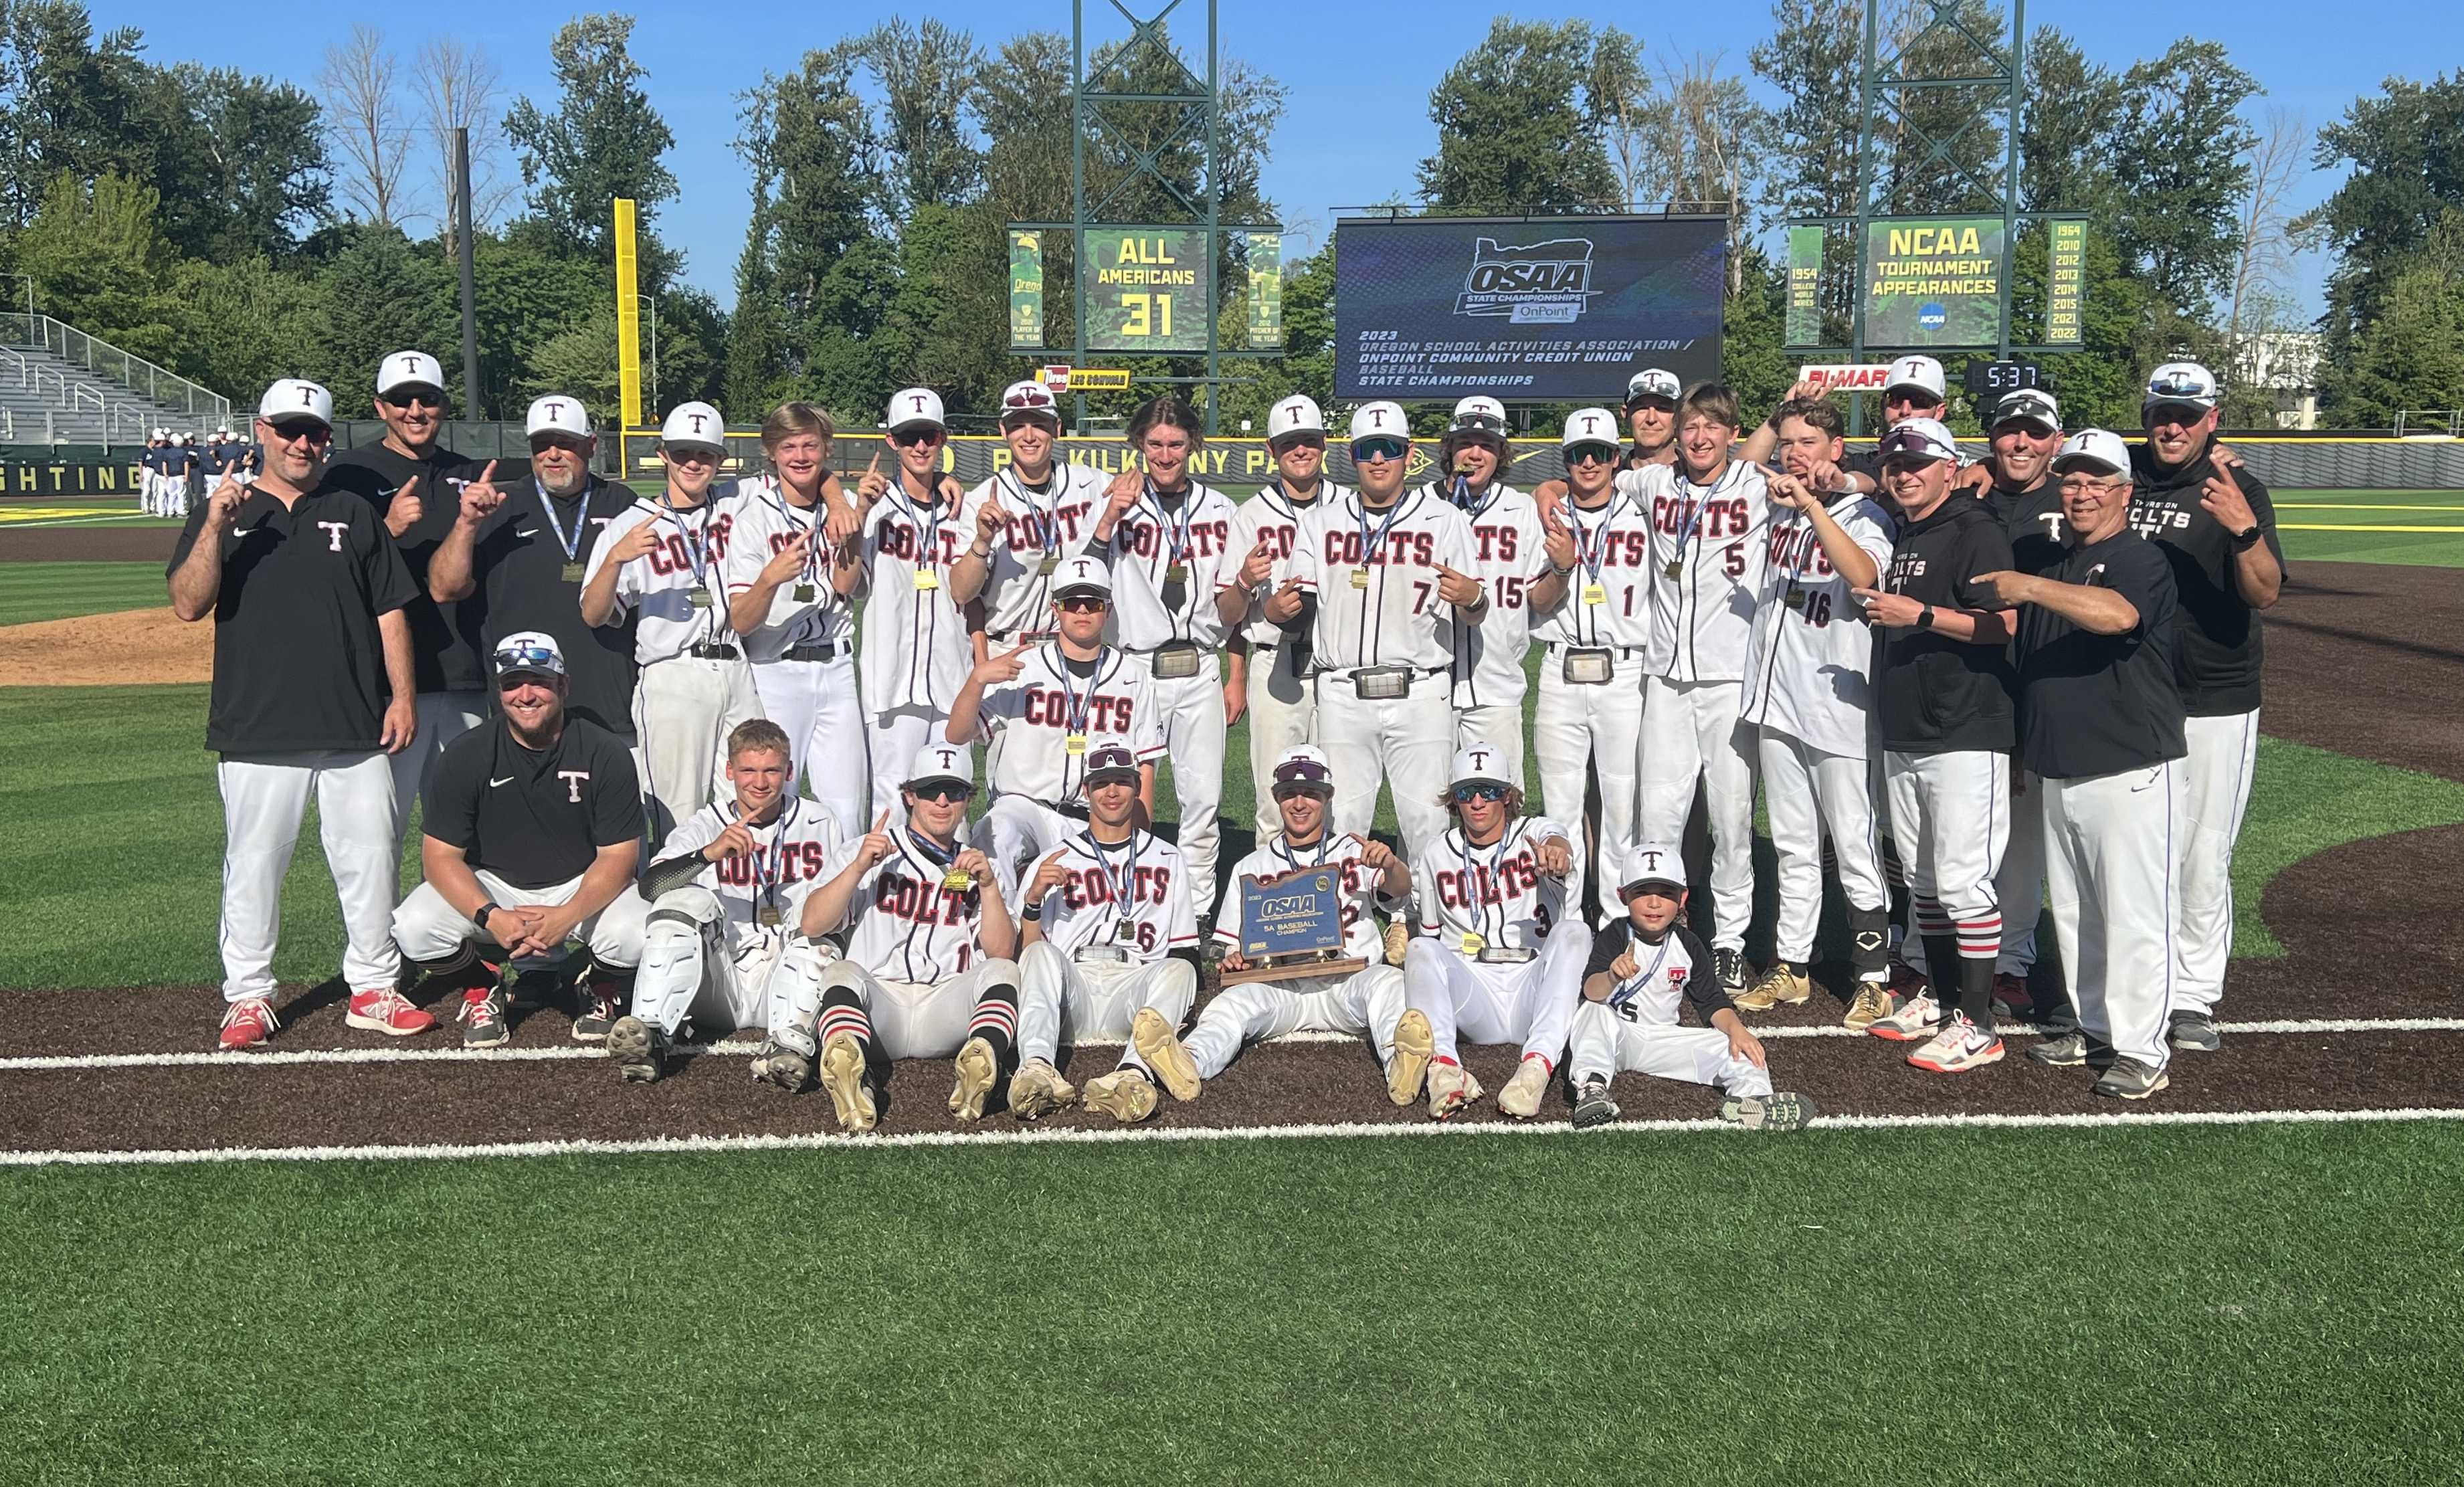 5A baseball final: Thurston edges West Albany 2-1 in thriller